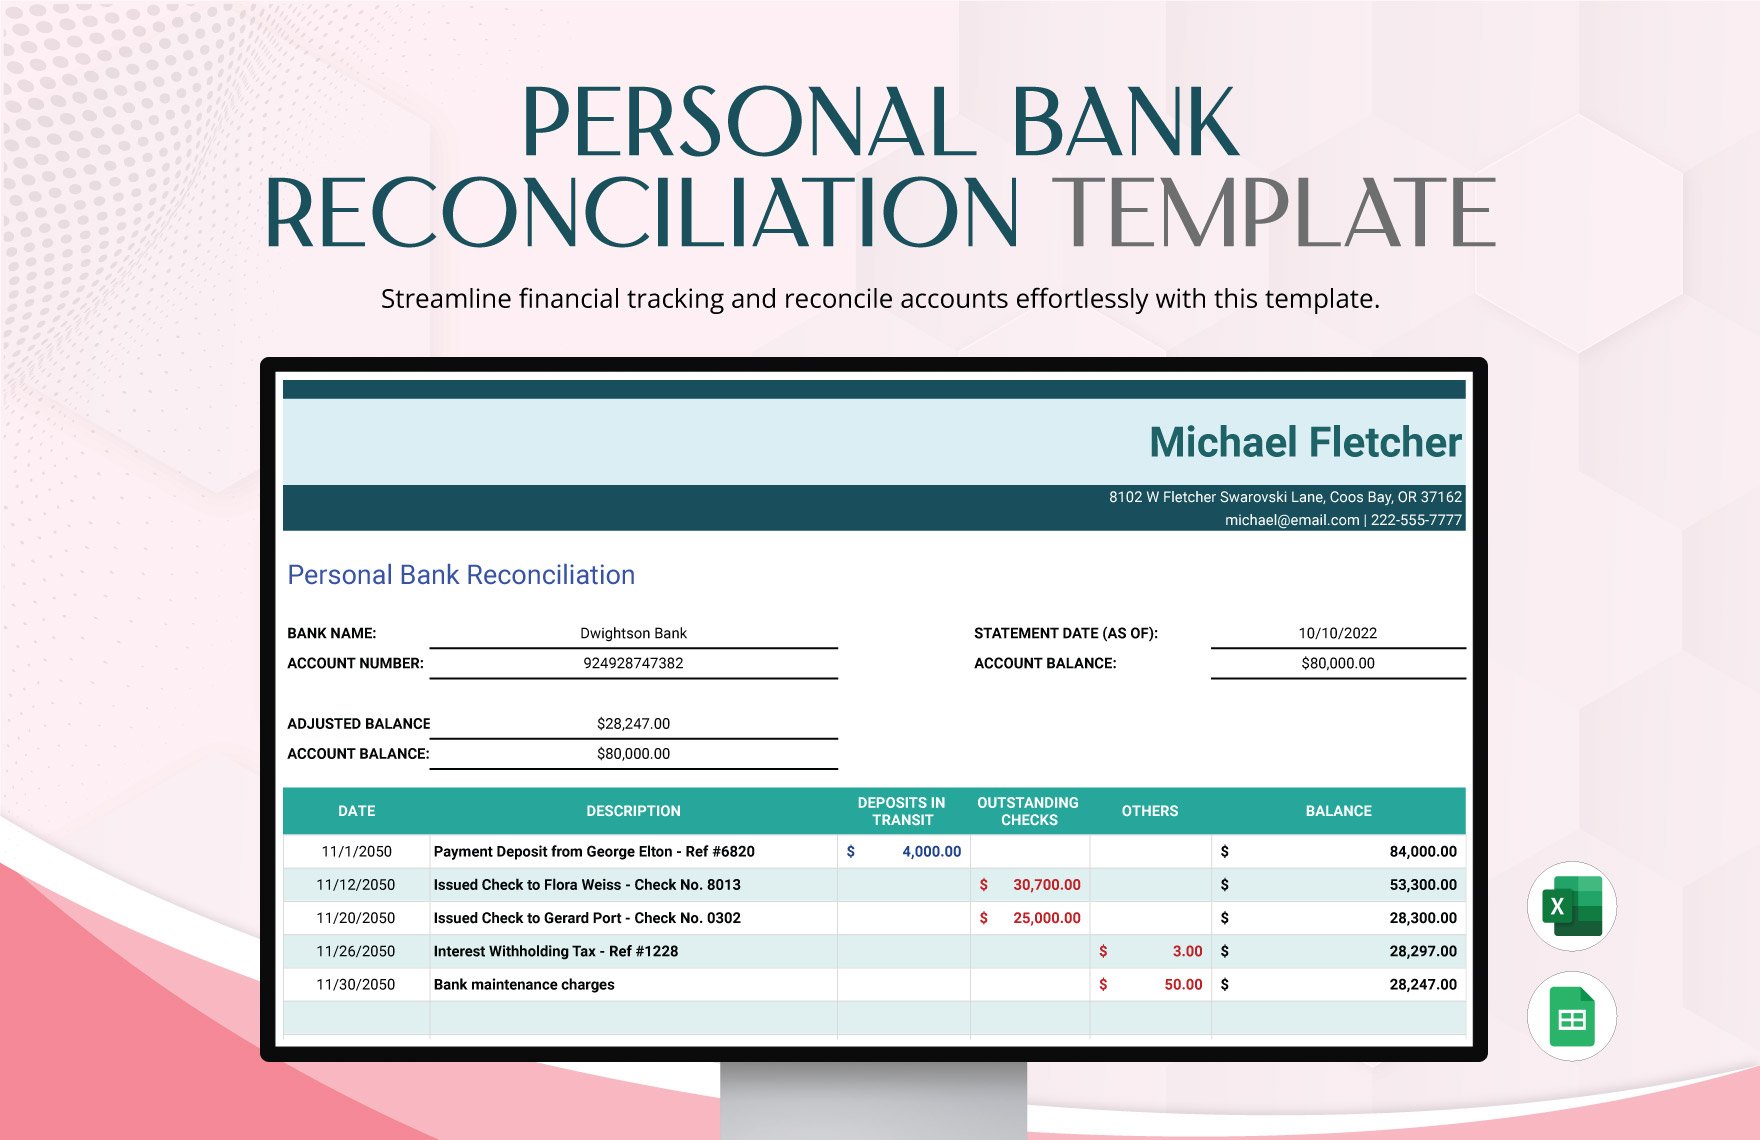 Personal Bank Reconciliation Template in Excel, Google Sheets